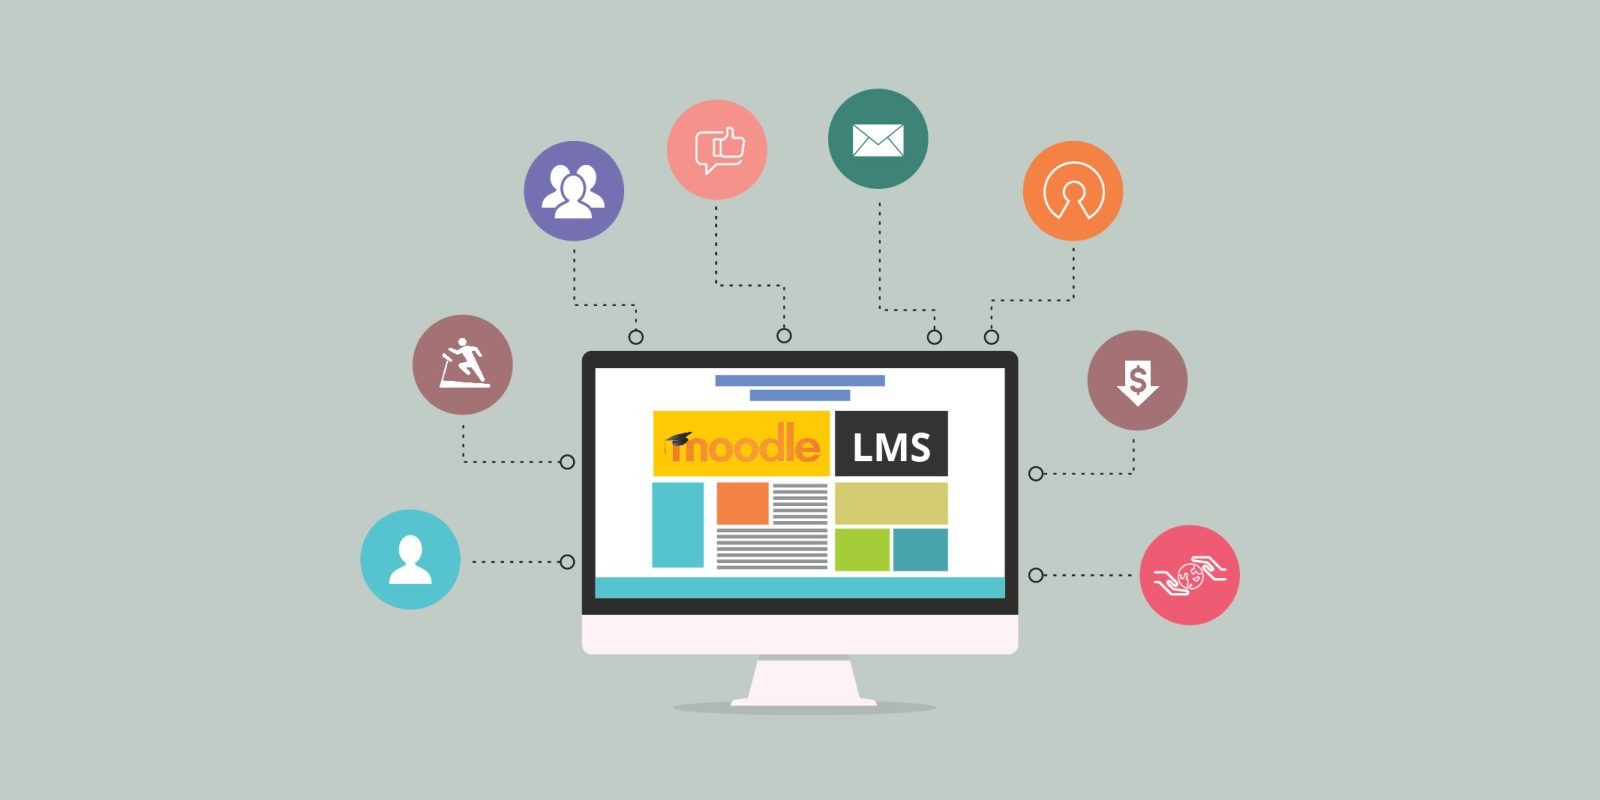 8 Popular Features of Moodle LMS for Corporate Training You Should Know